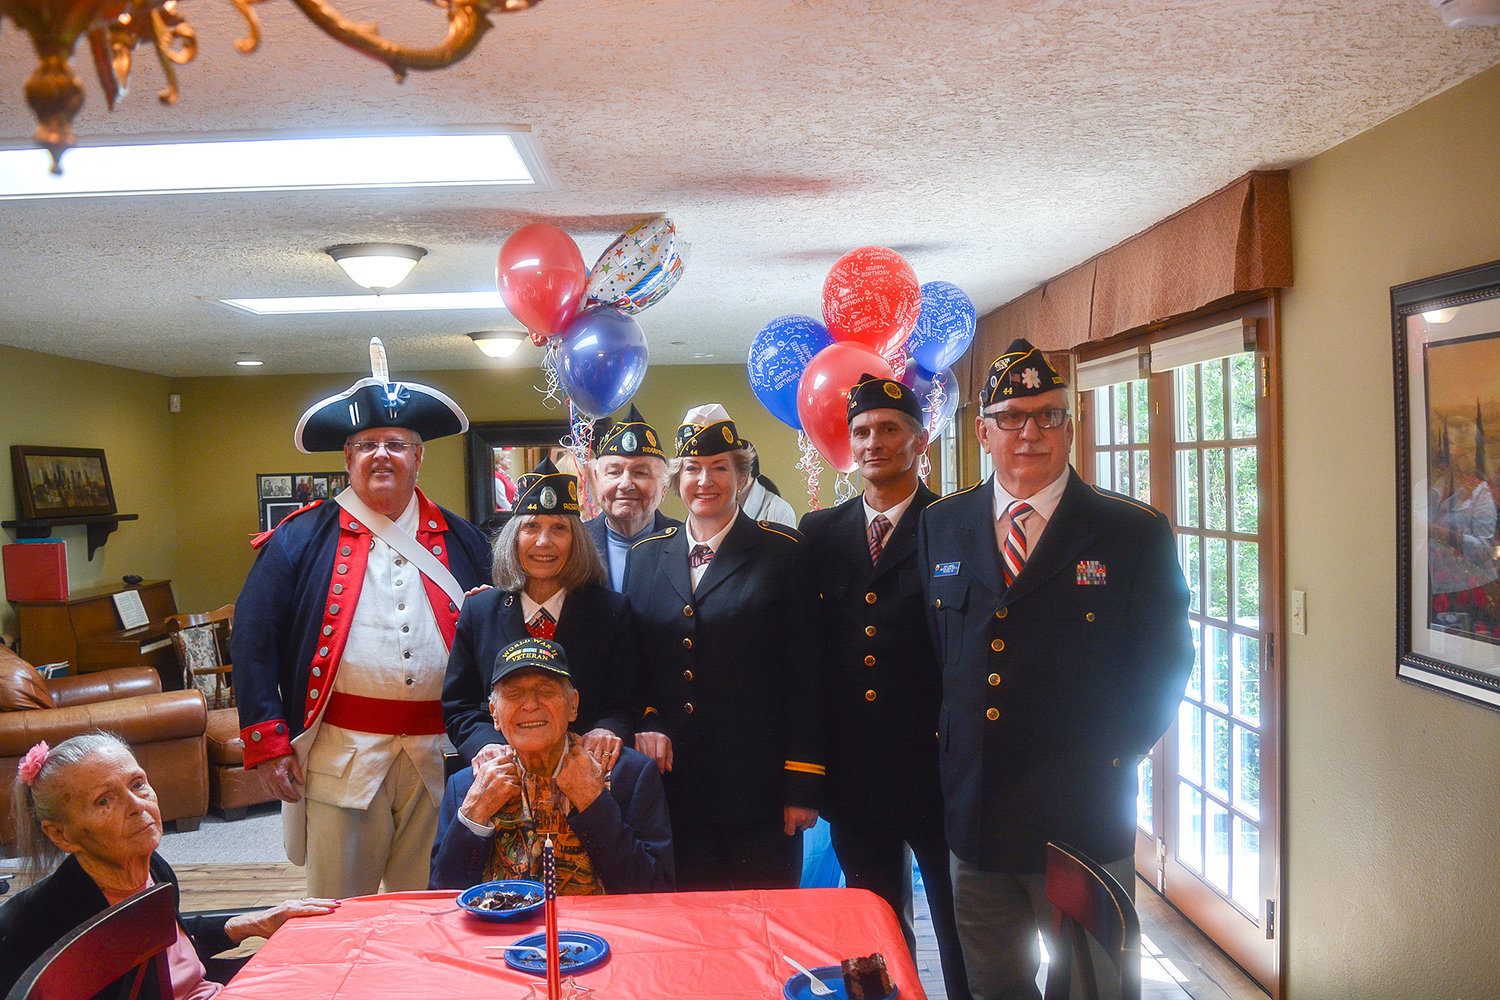 William “Lucky” Mullins was surrounded by his fellow members of the Ridgefield American Legion Post 44 during his birthday party in Vancouver on May 4.